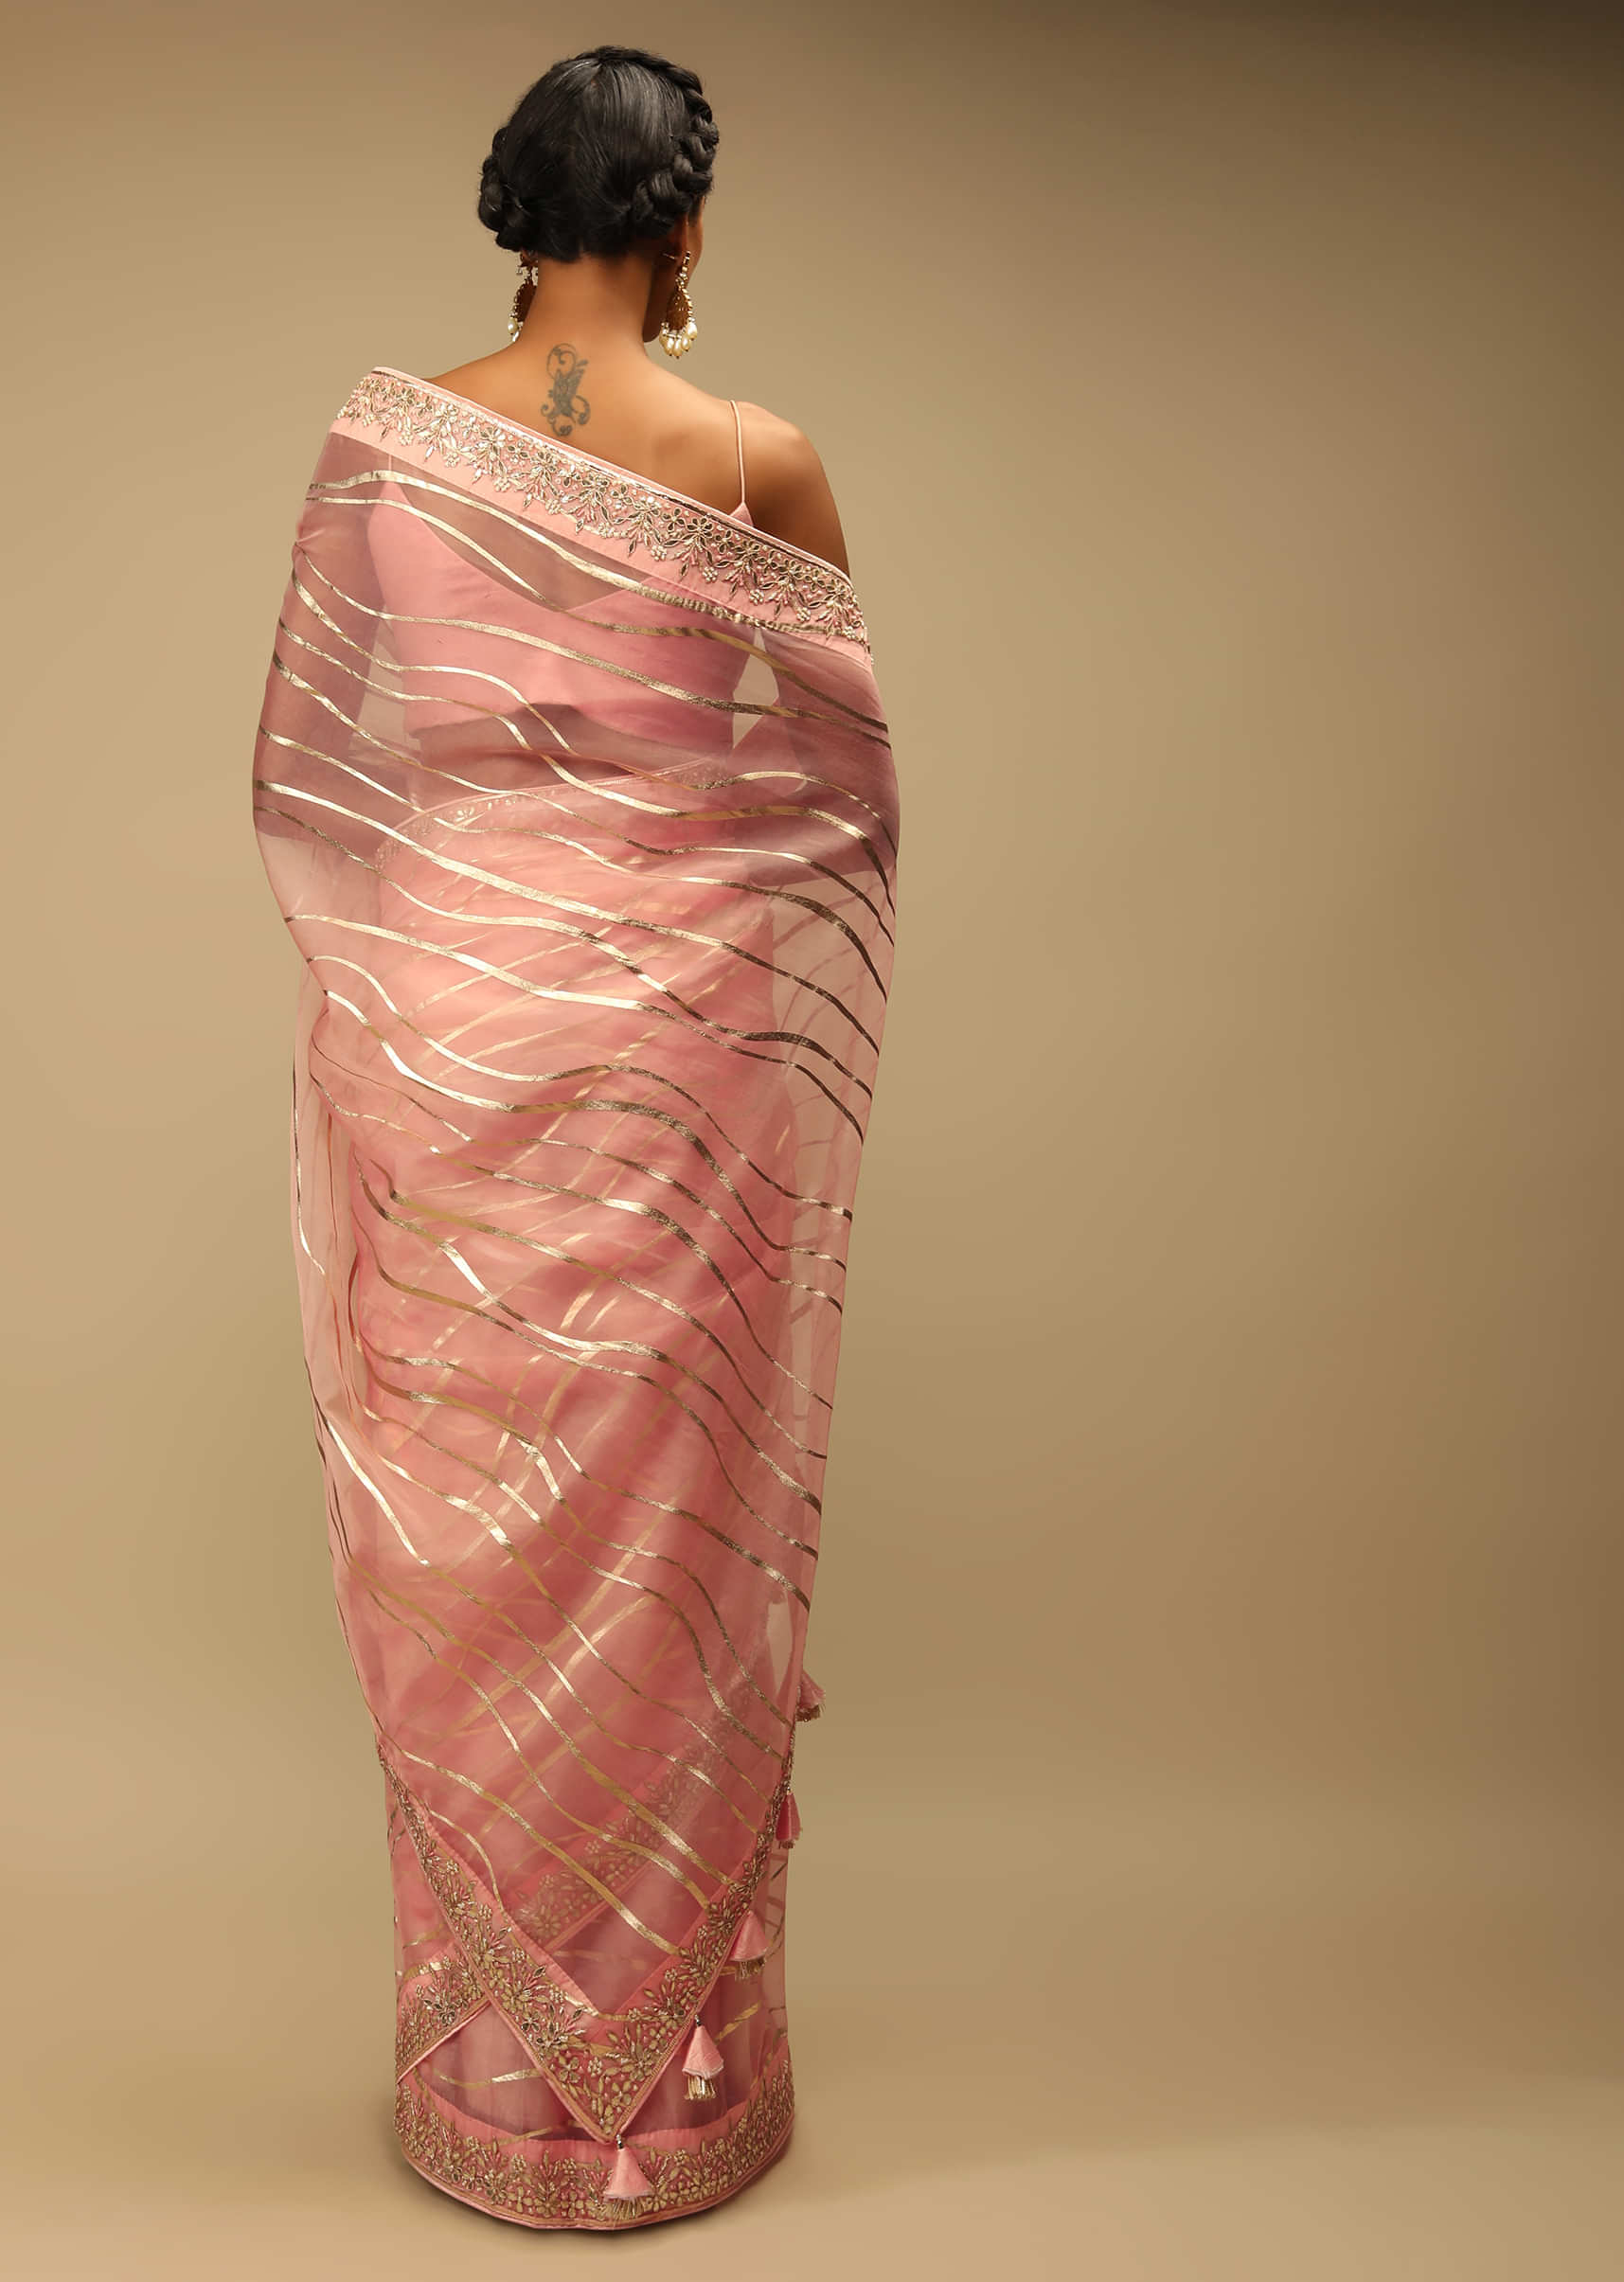 Peach Pink Saree In Organza With Foil Printed Wave Design And Gotta Border